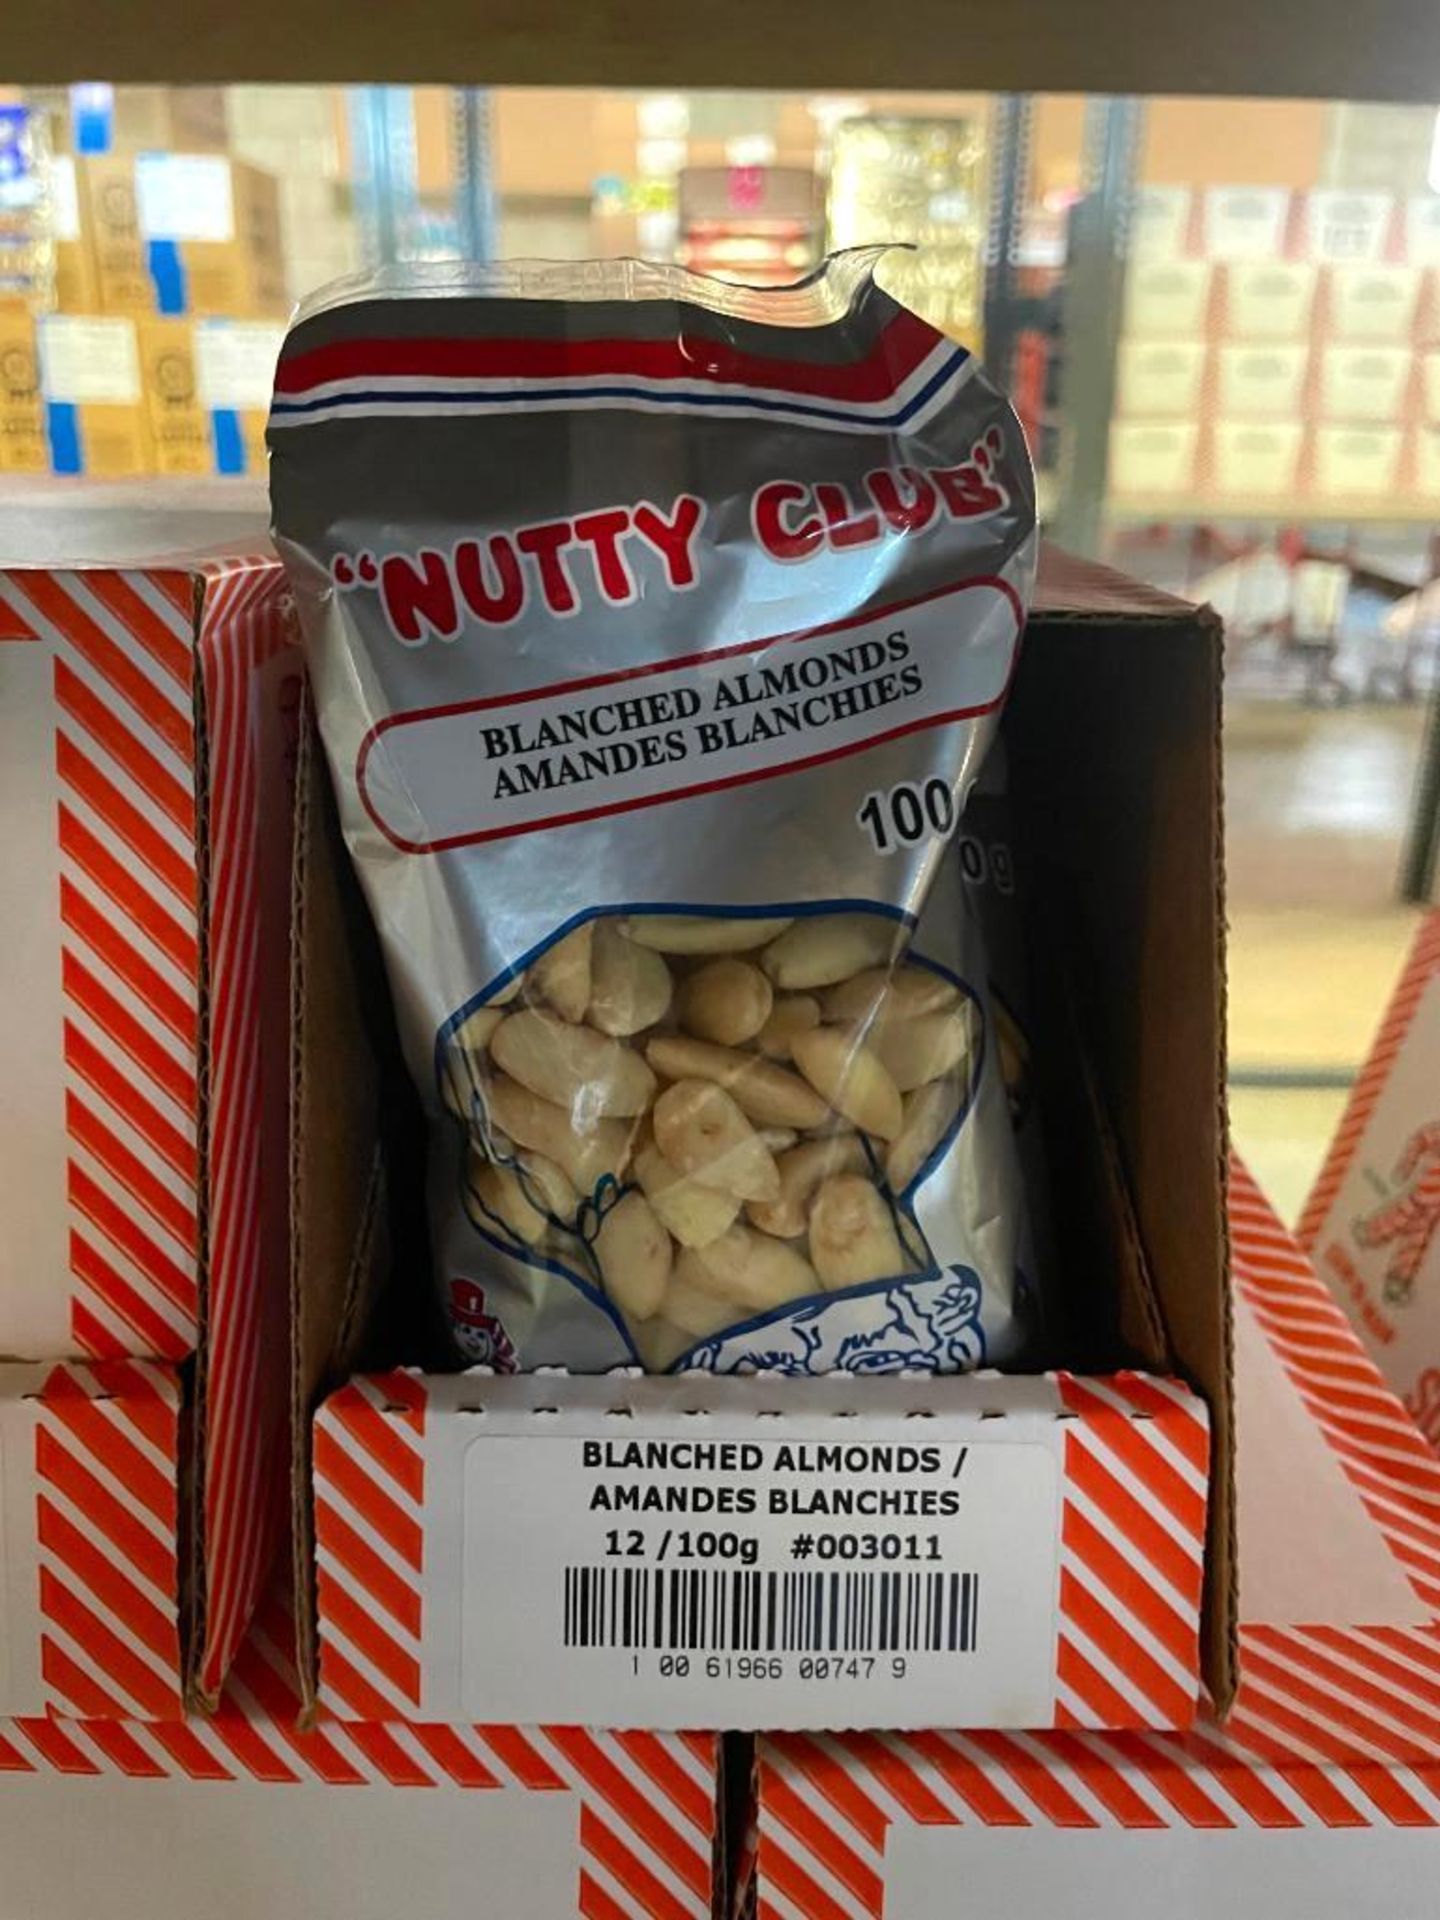 (11) BOXES OF NUTTY CLUB BLANCHED ALMONDS, 12/100G BAGS PER BOX - Image 2 of 3